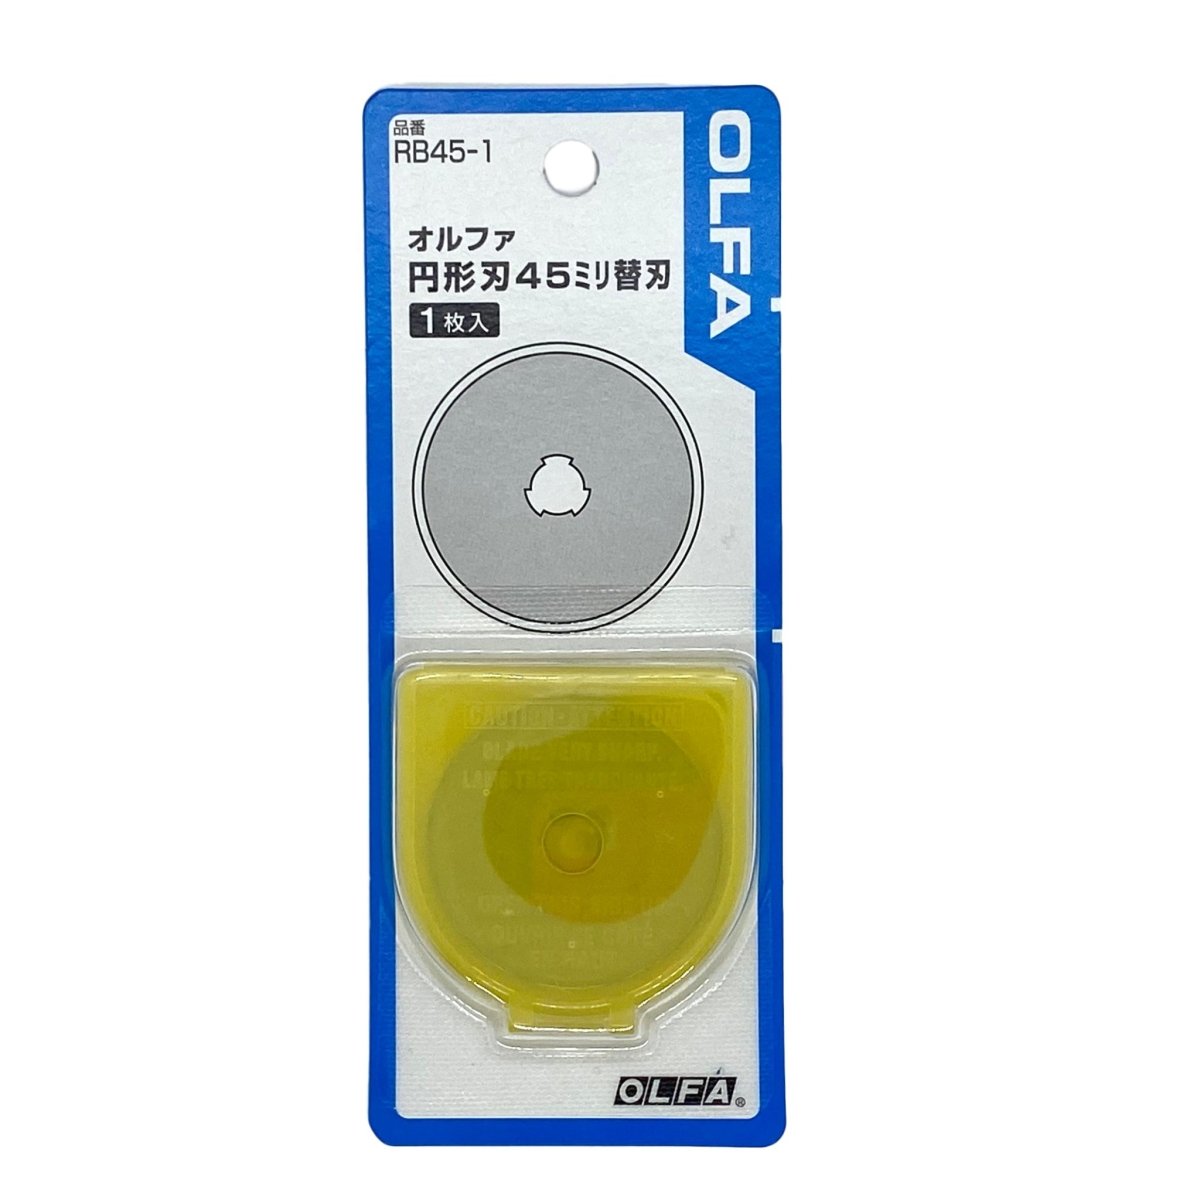 Olfa - Rotary Cutter Spare Blade - 45 mm - Sewing Gem